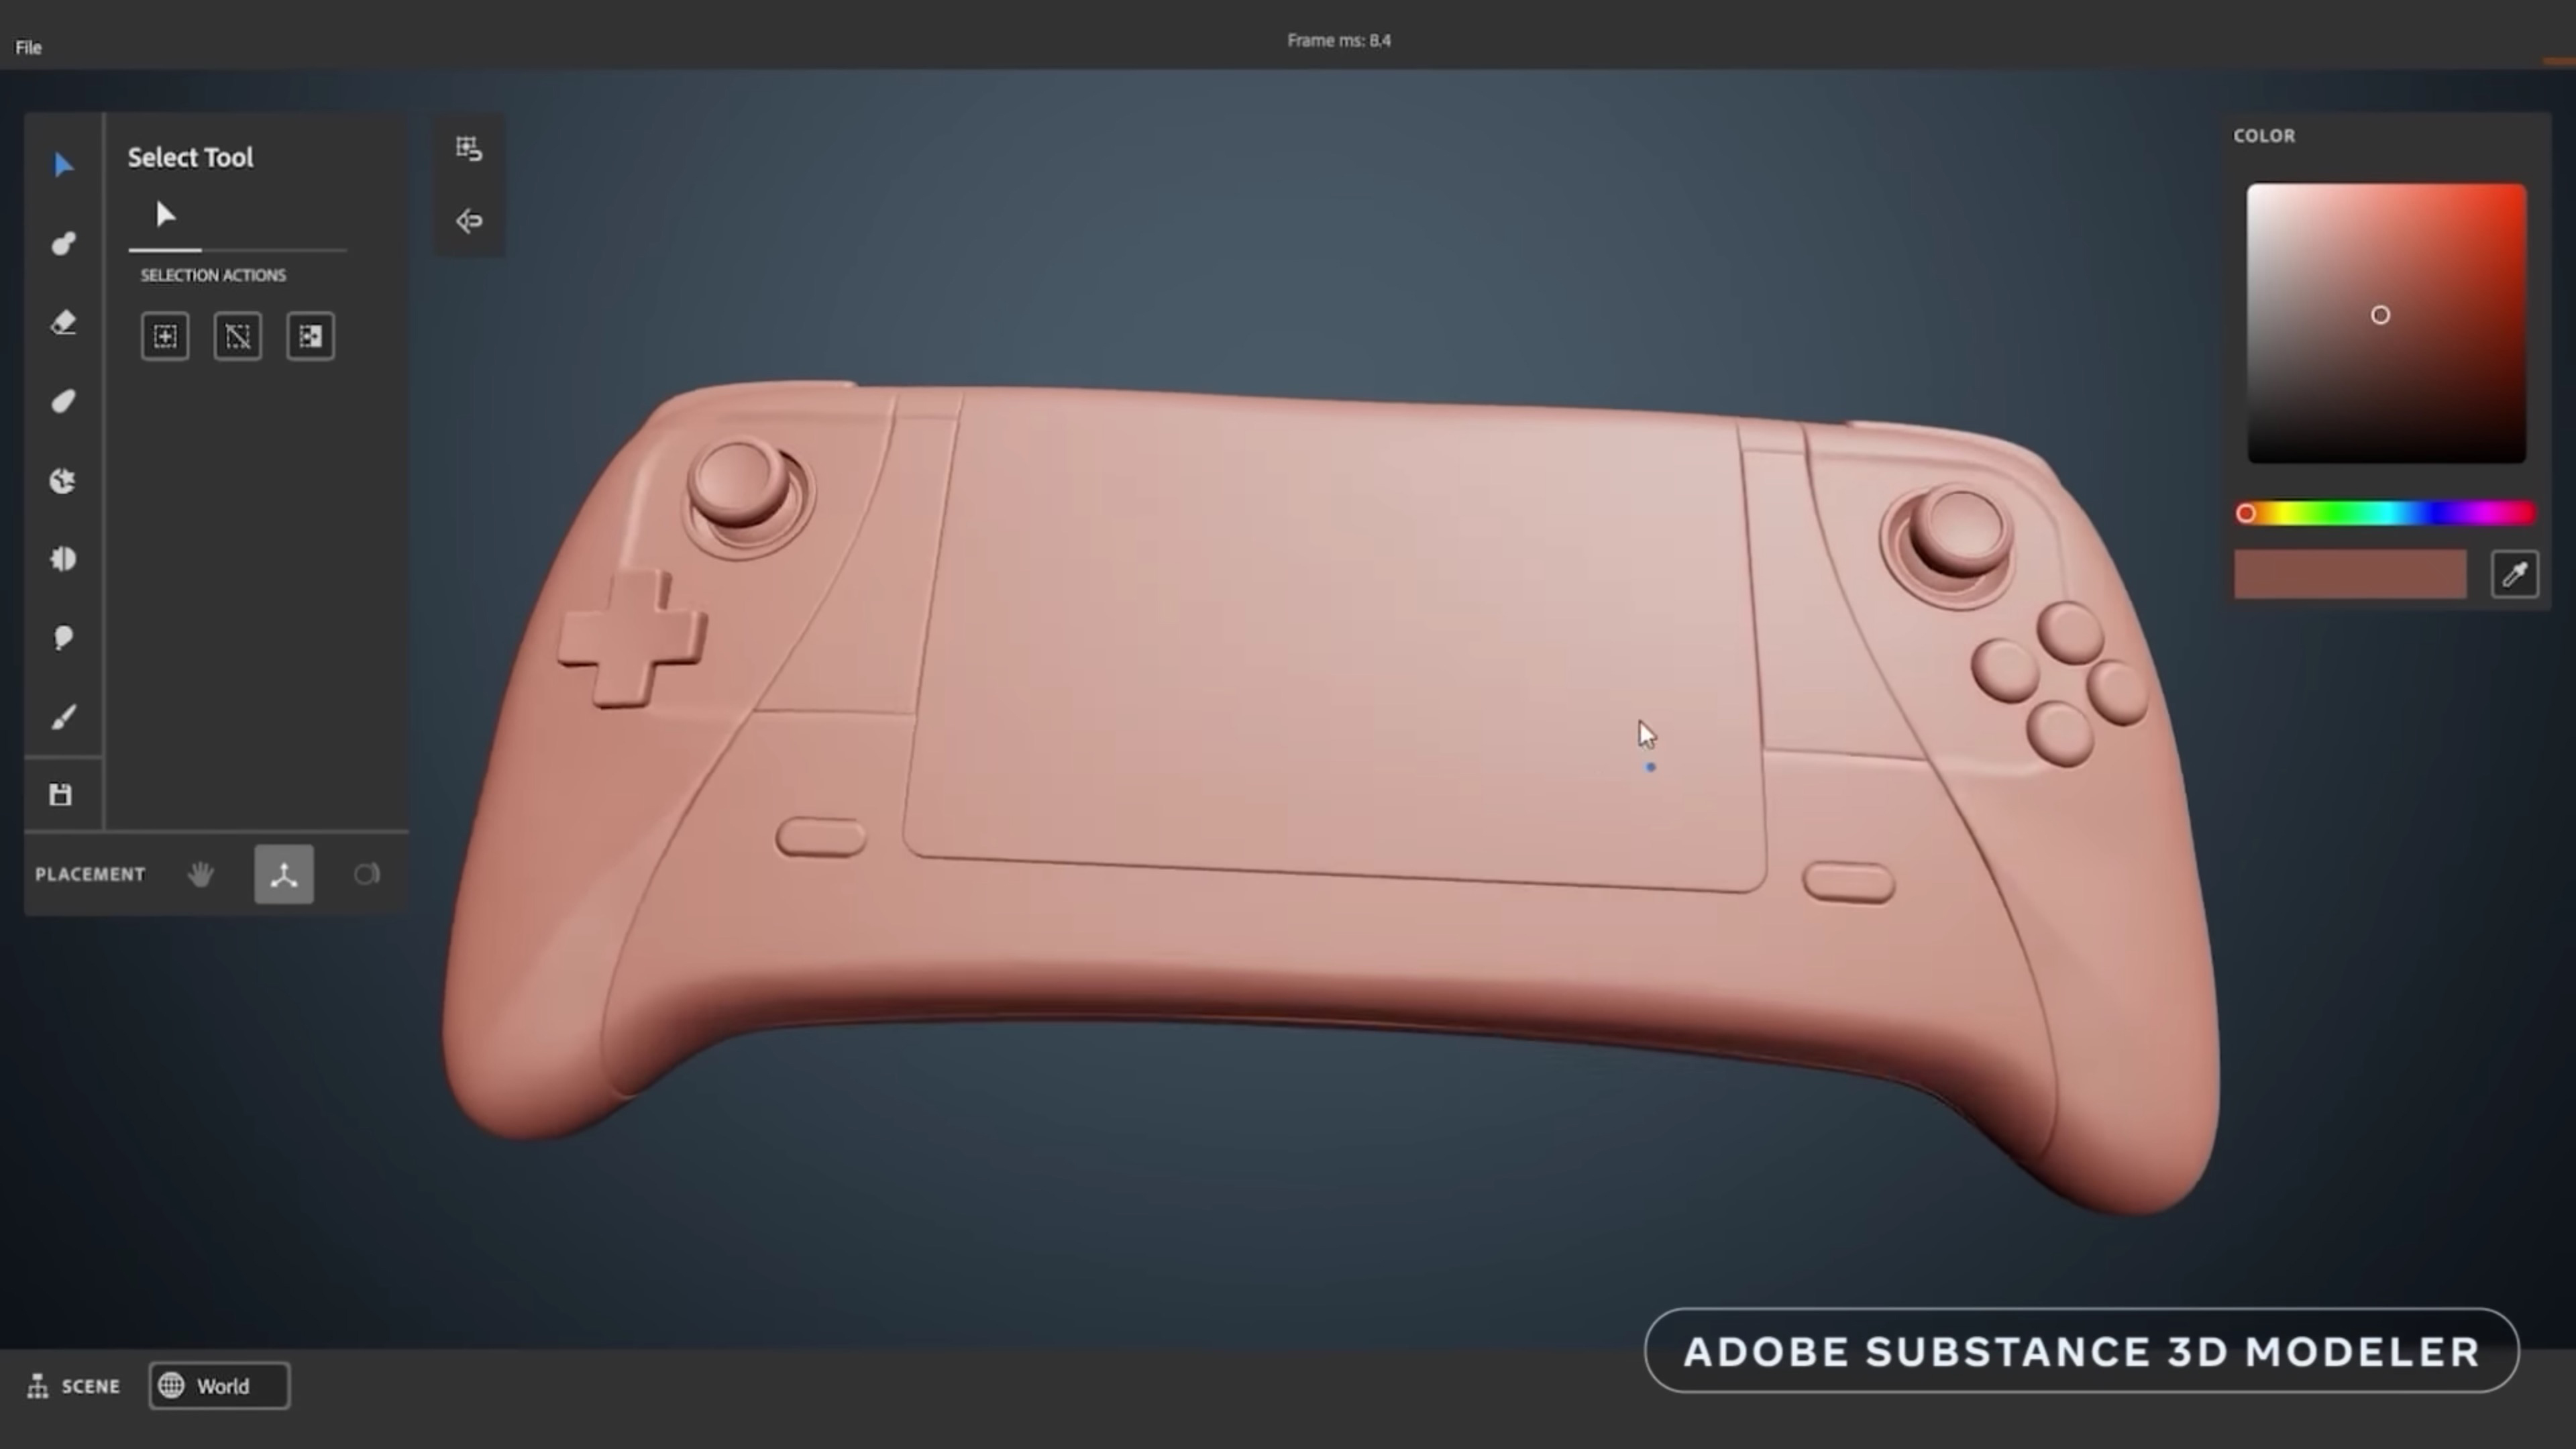 A virtual gamepad in Adobe 3D modeling software